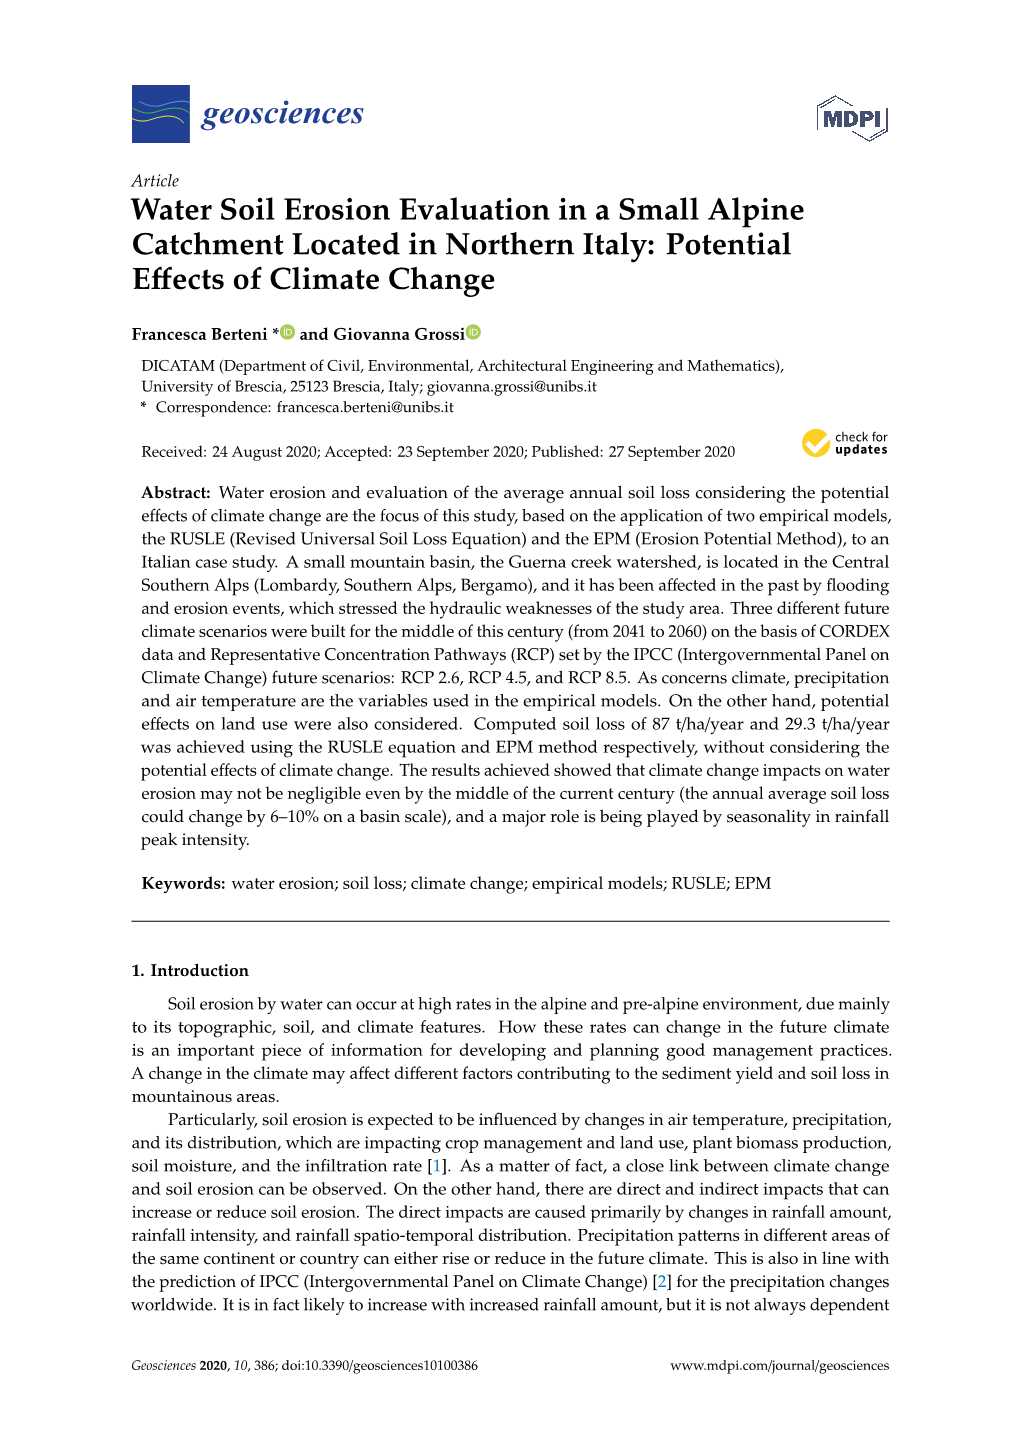 Water Soil Erosion Evaluation in a Small Alpine Catchment Located in Northern Italy: Potential Eﬀects of Climate Change